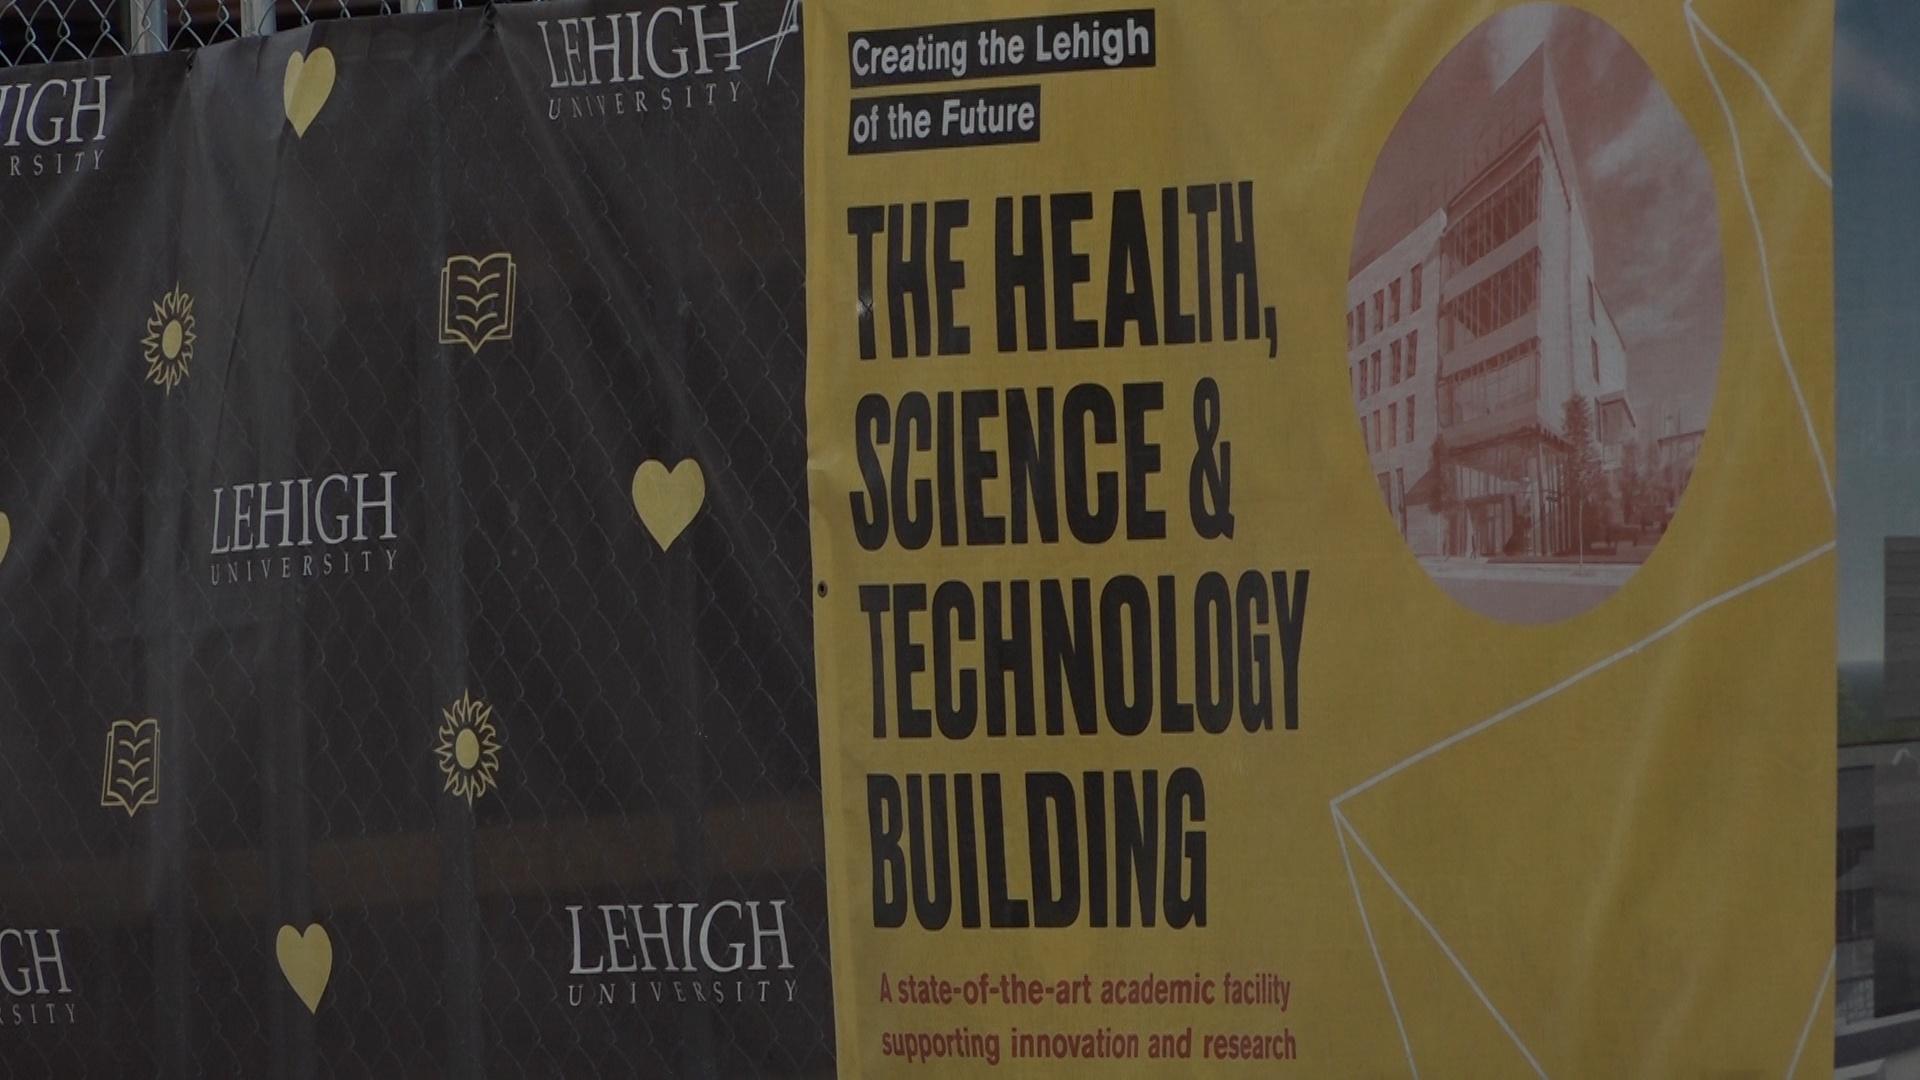 Construction on the Health, Science and Technology building